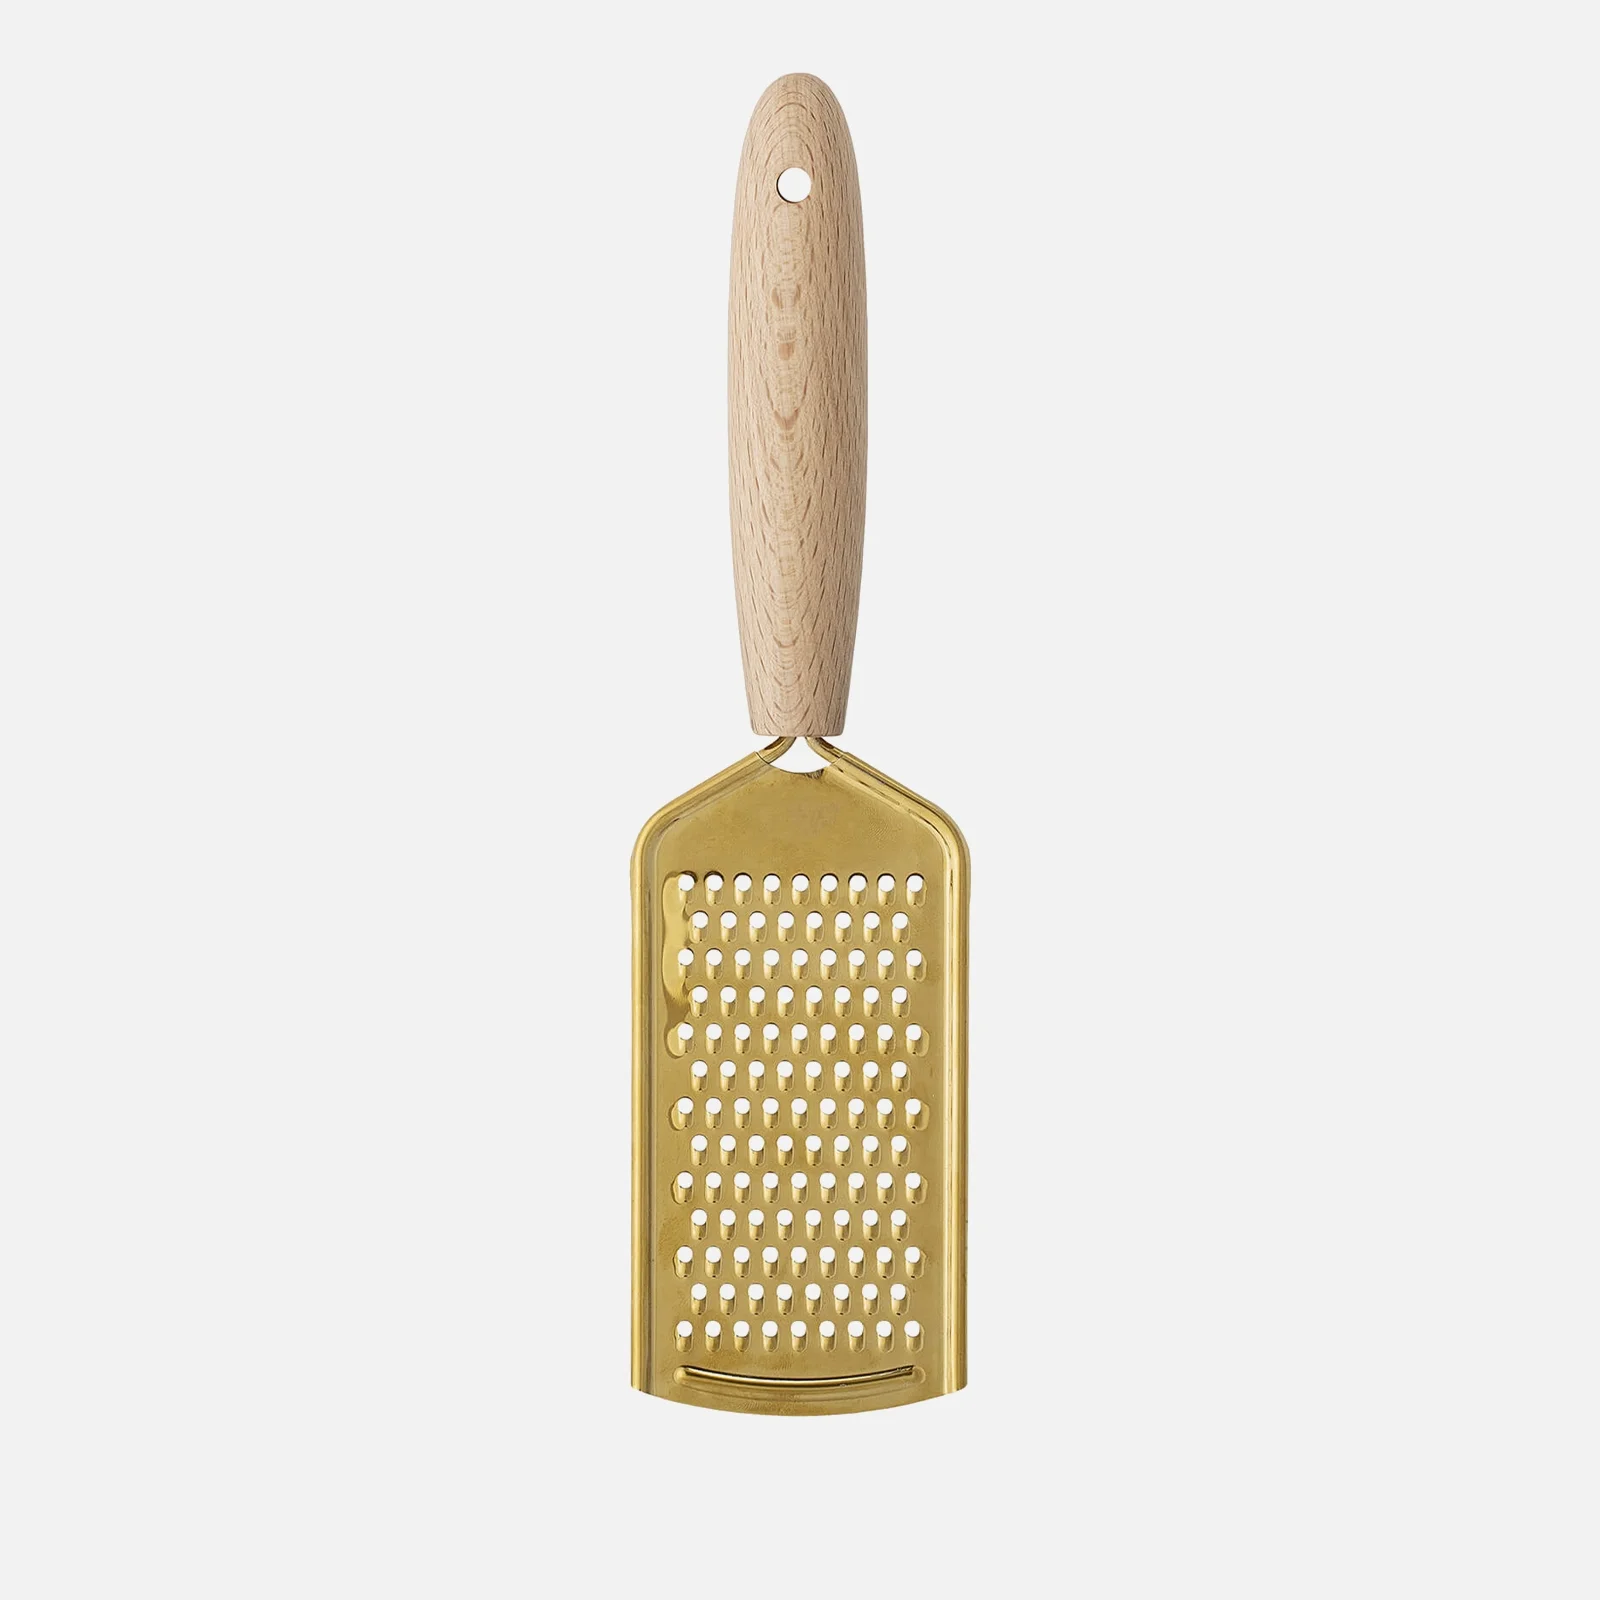 Bloomingville Grater - Gold & Wood Image 1